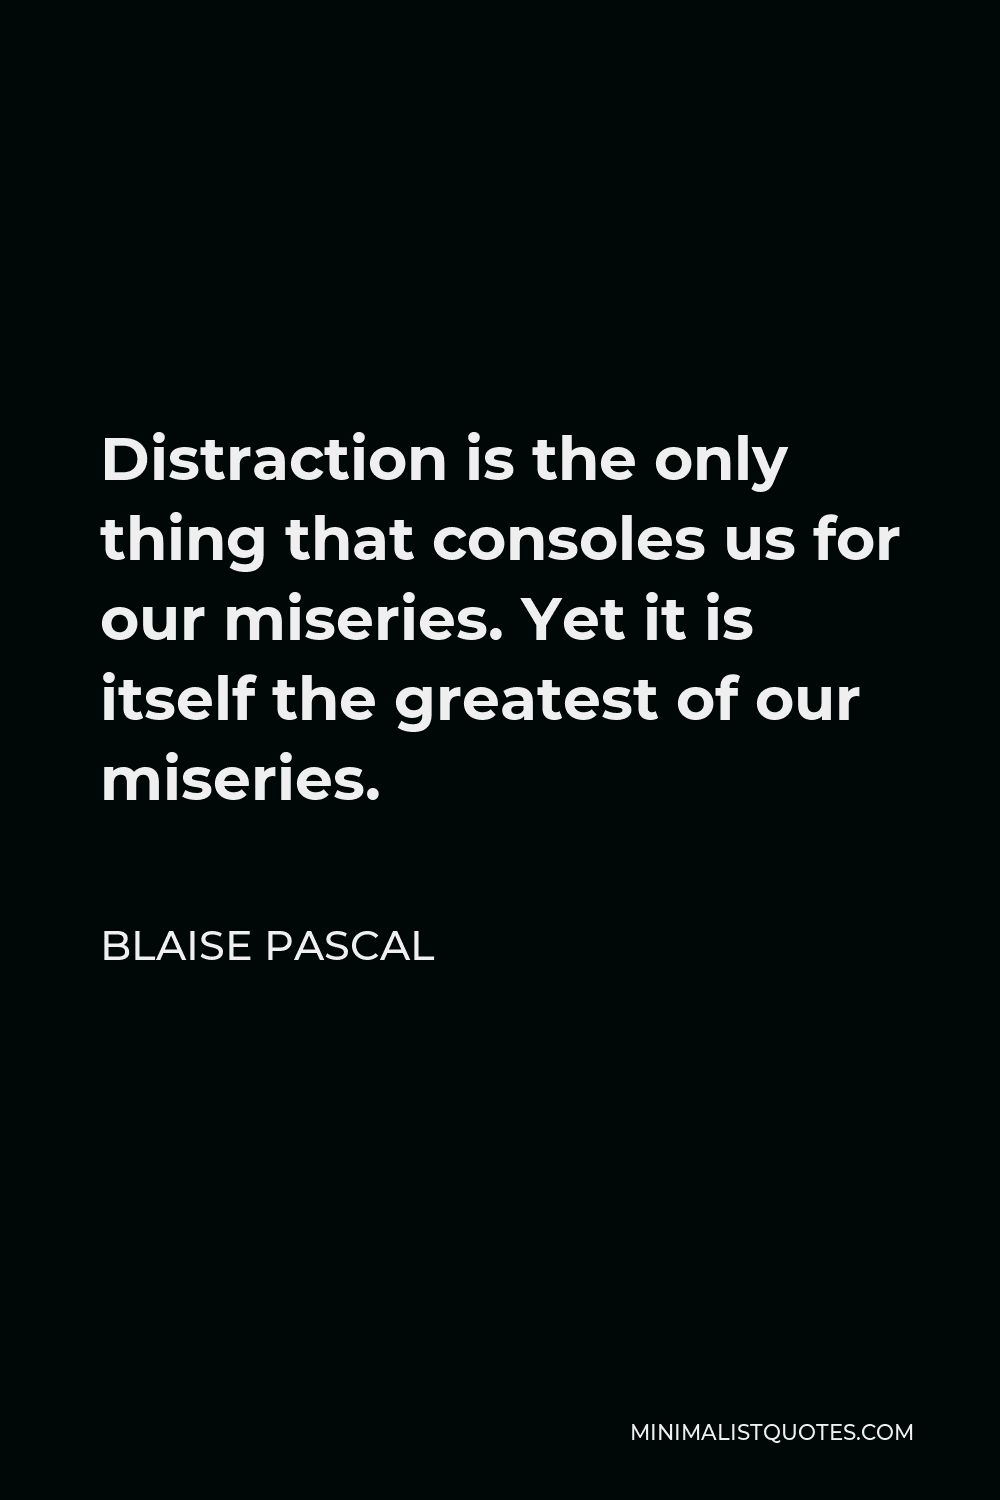 Blaise Pascal Quote - Distraction is the only thing that consoles us for our miseries. Yet it is itself the greatest of our miseries.